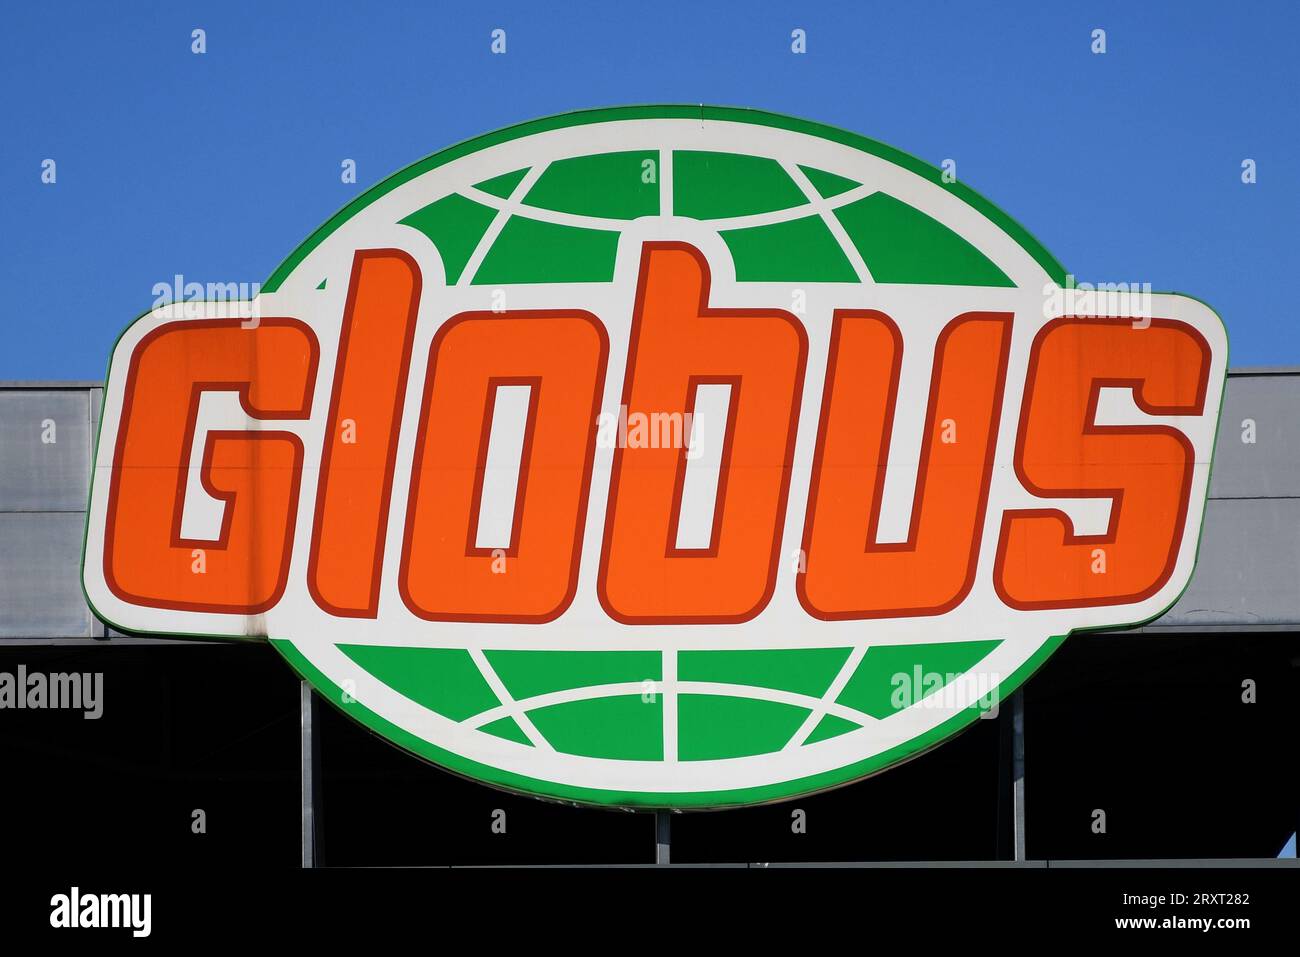 Czechia's antitrust office UOHS has initiated administrative proceedings against the Globus retail chain, suspecting it of long-term discrimination ag Stock Photo